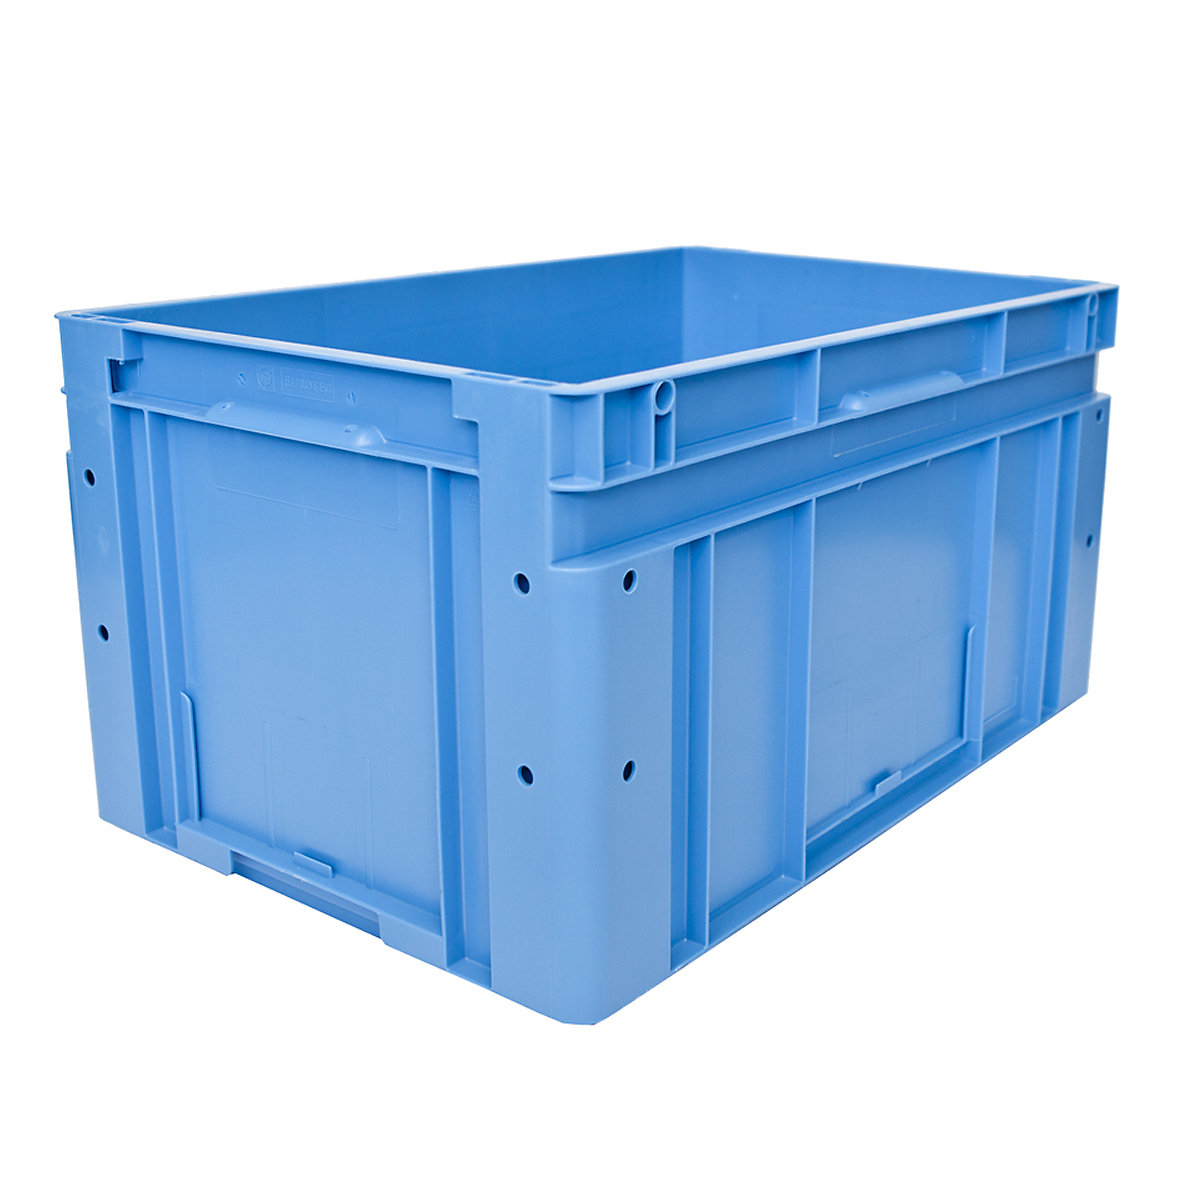 Euro size stacking containers, external LxWxH 600 x 400 x 320 mm, blue